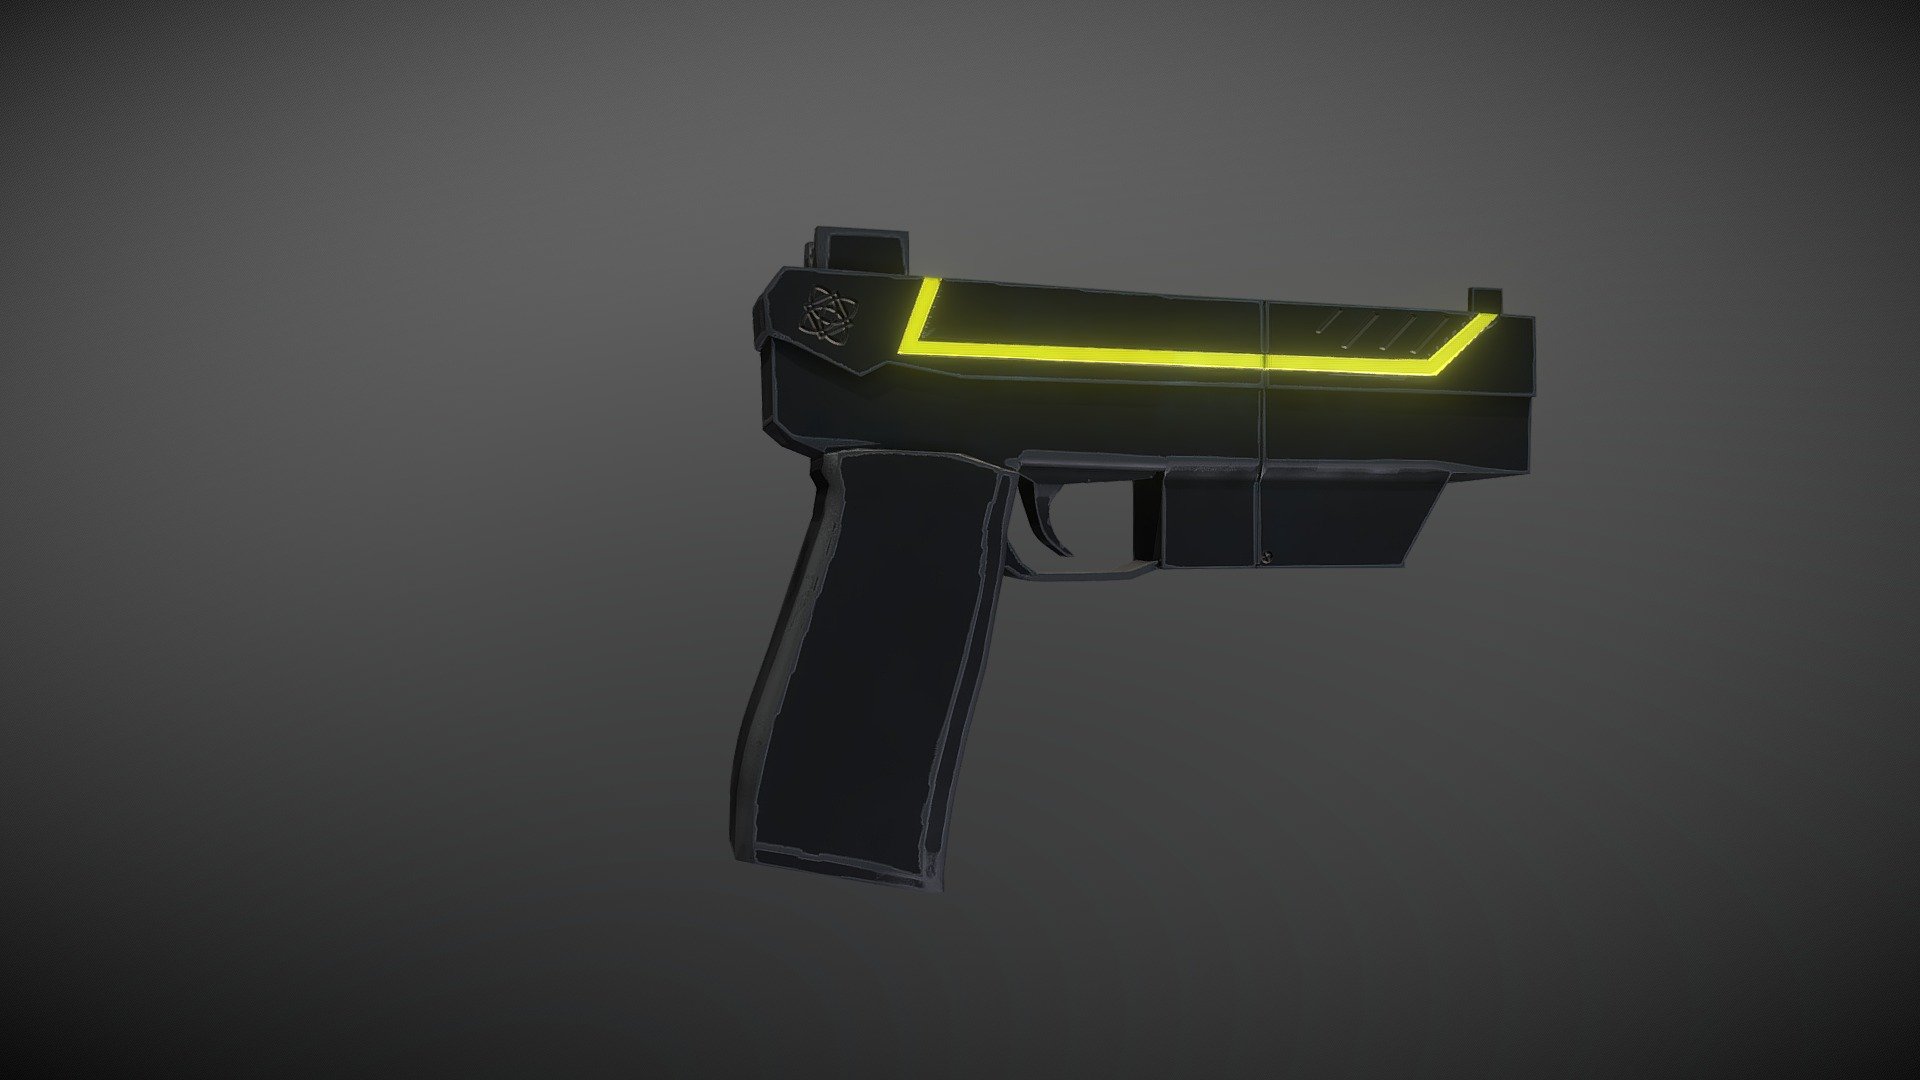 This is my first attempt at making a gun 3d model